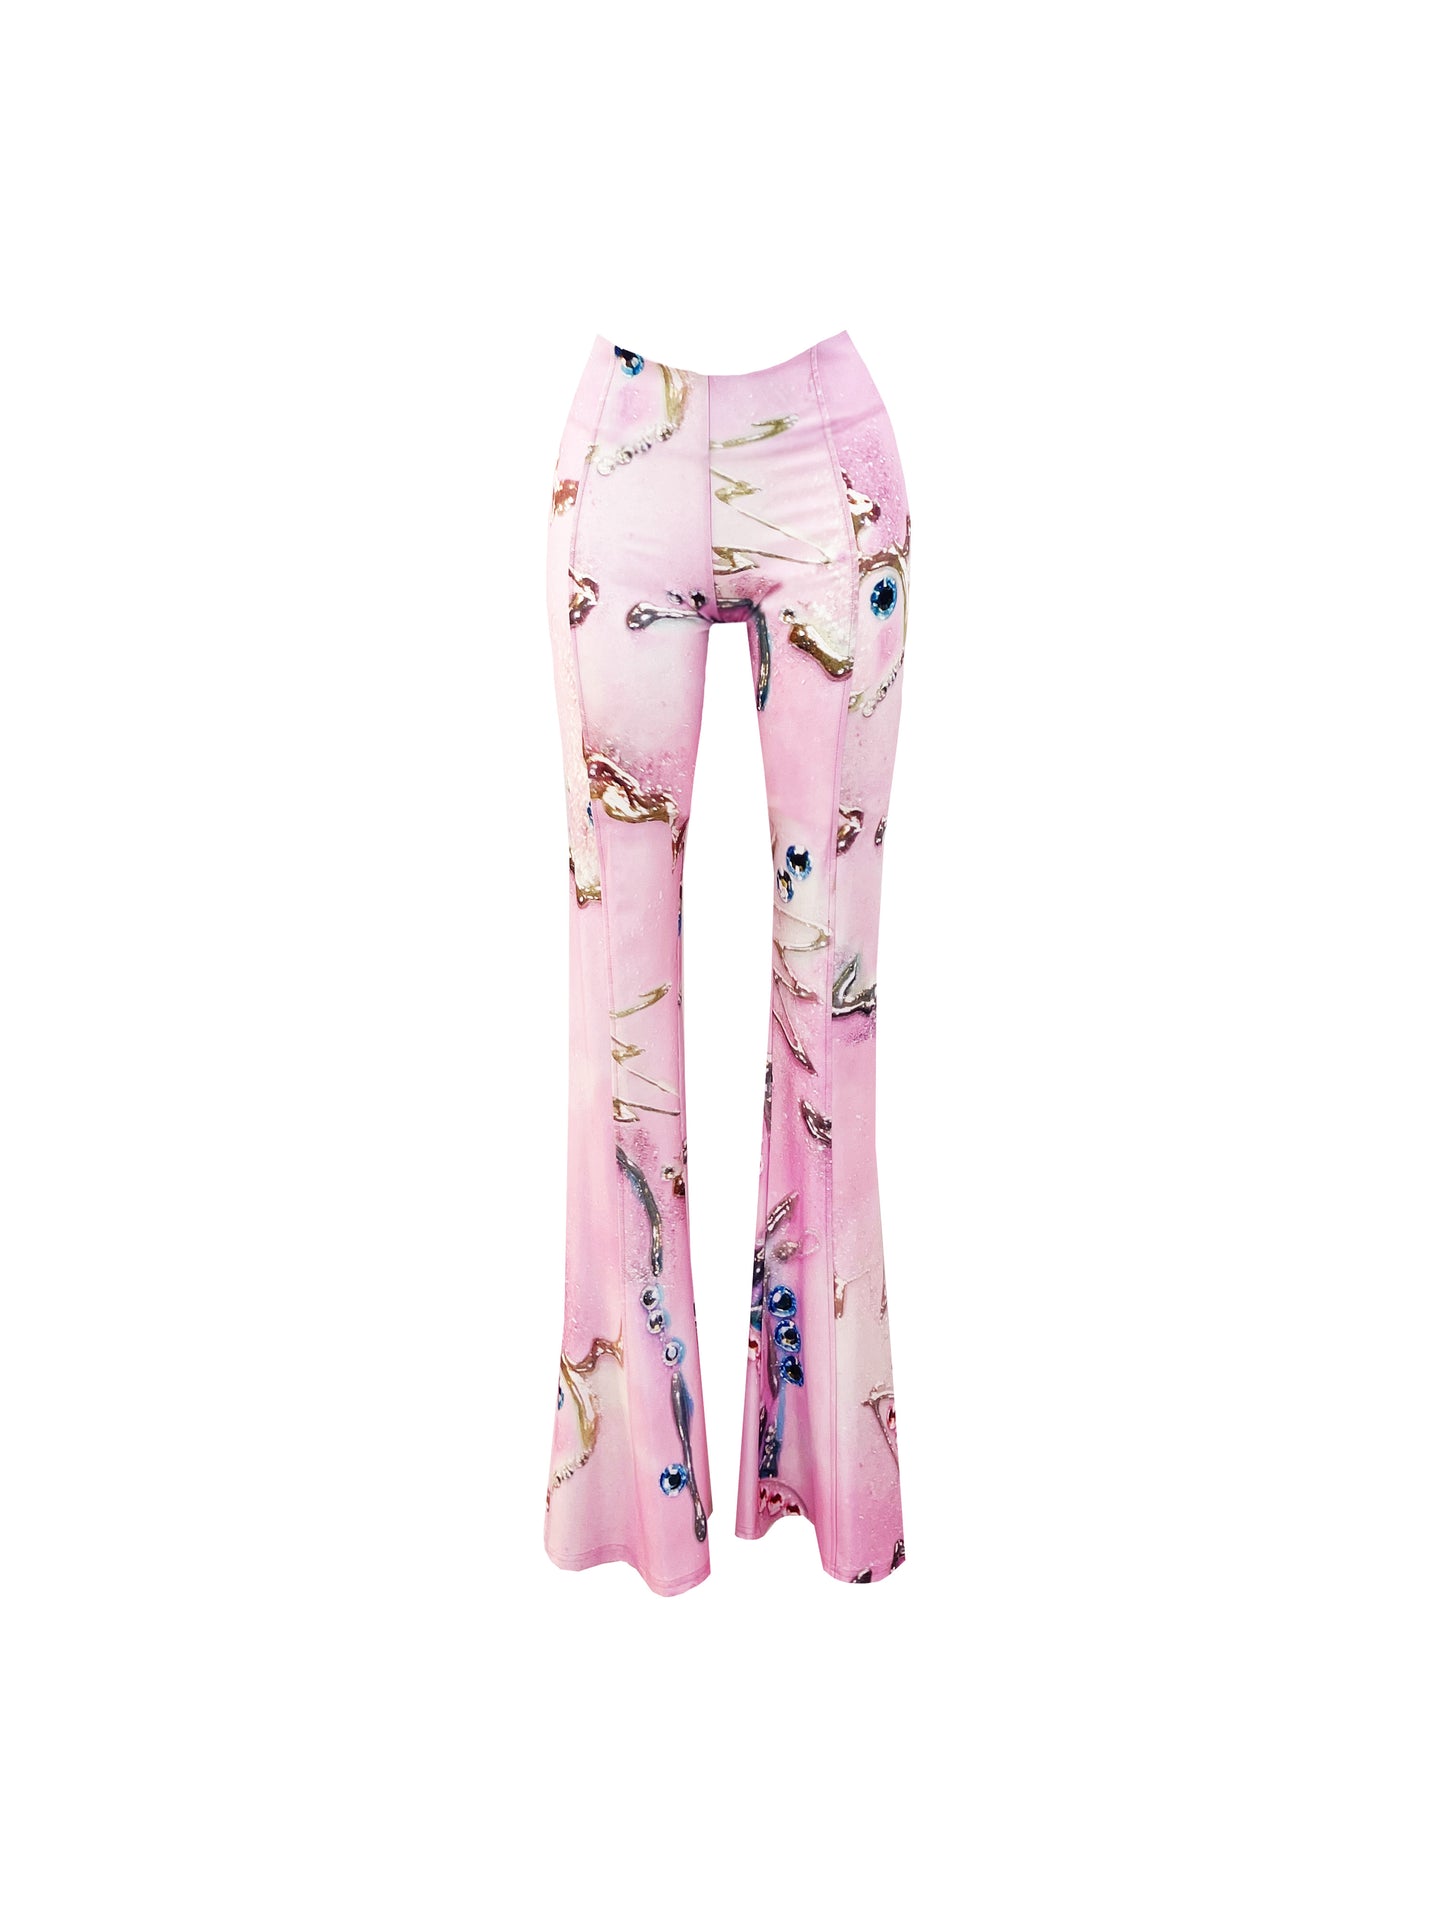 The Pink Mercury Trousers